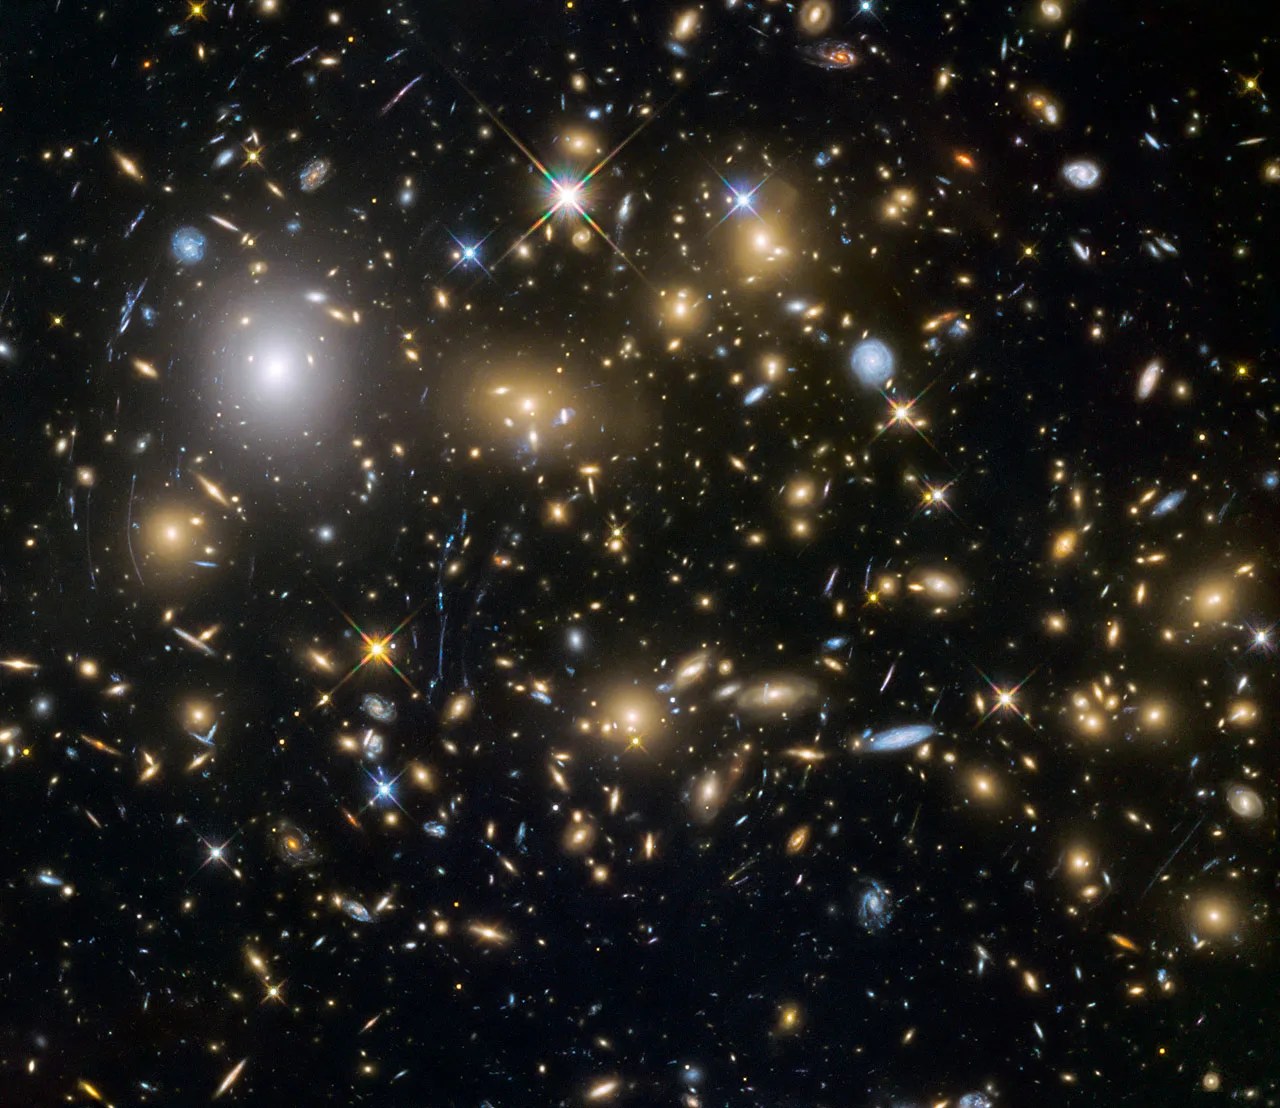 Largest sample of the faintest and earliest known galaxies in the universe